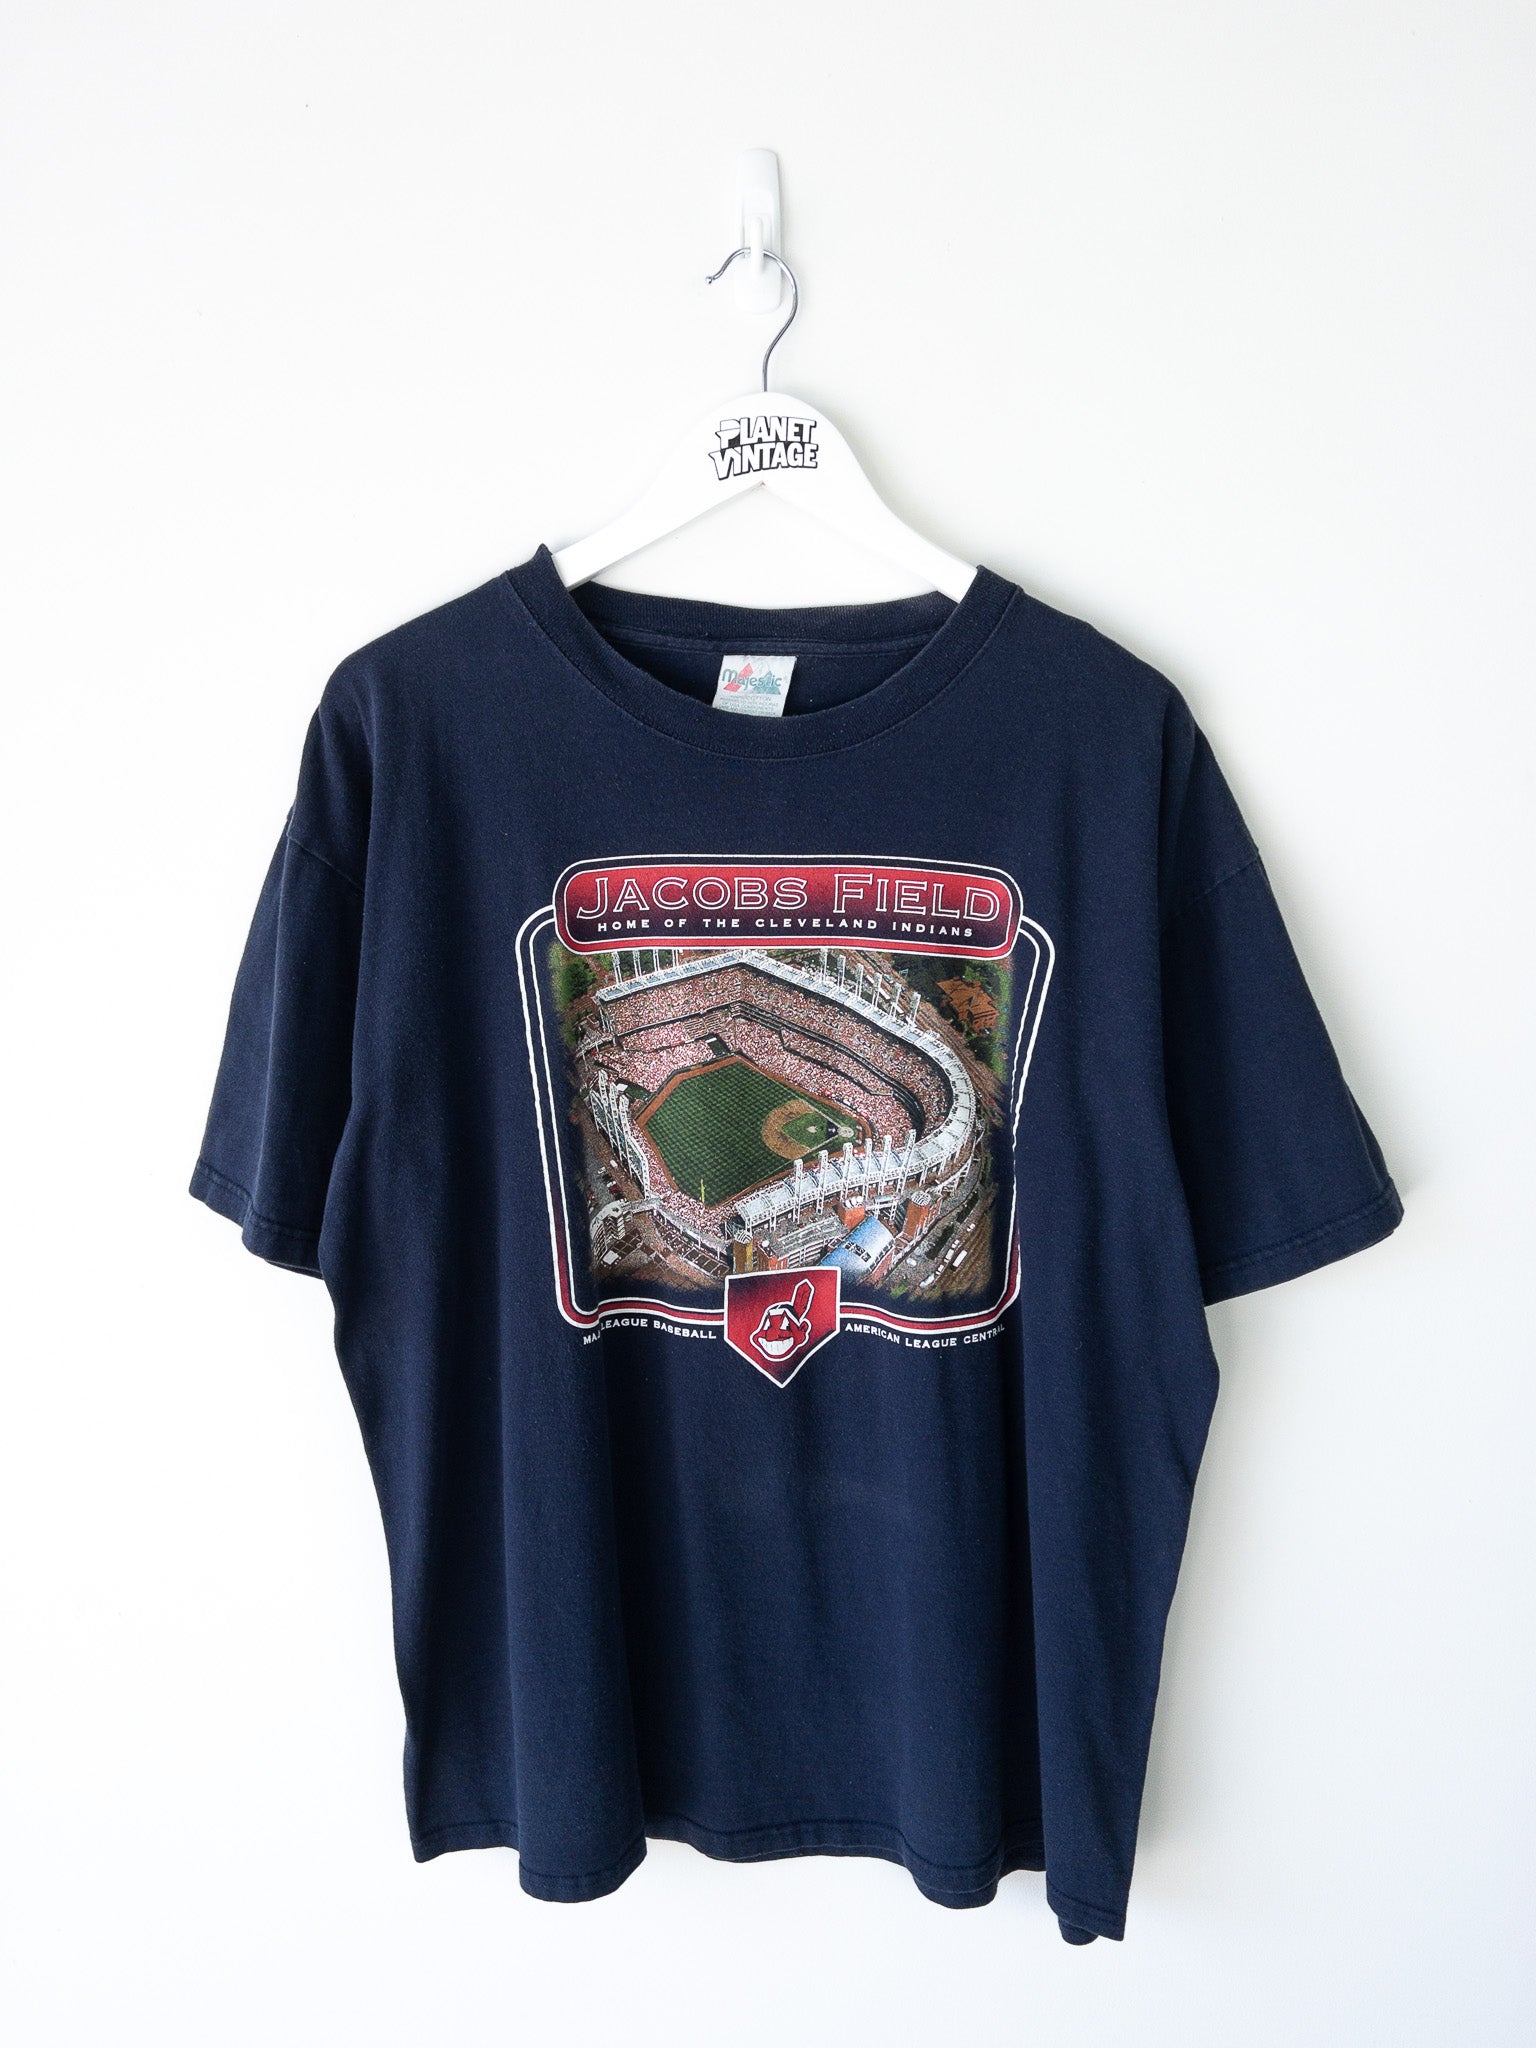 Vintage Jacobs Field Home of the Cleveland Indians 2002 Tee (XL)